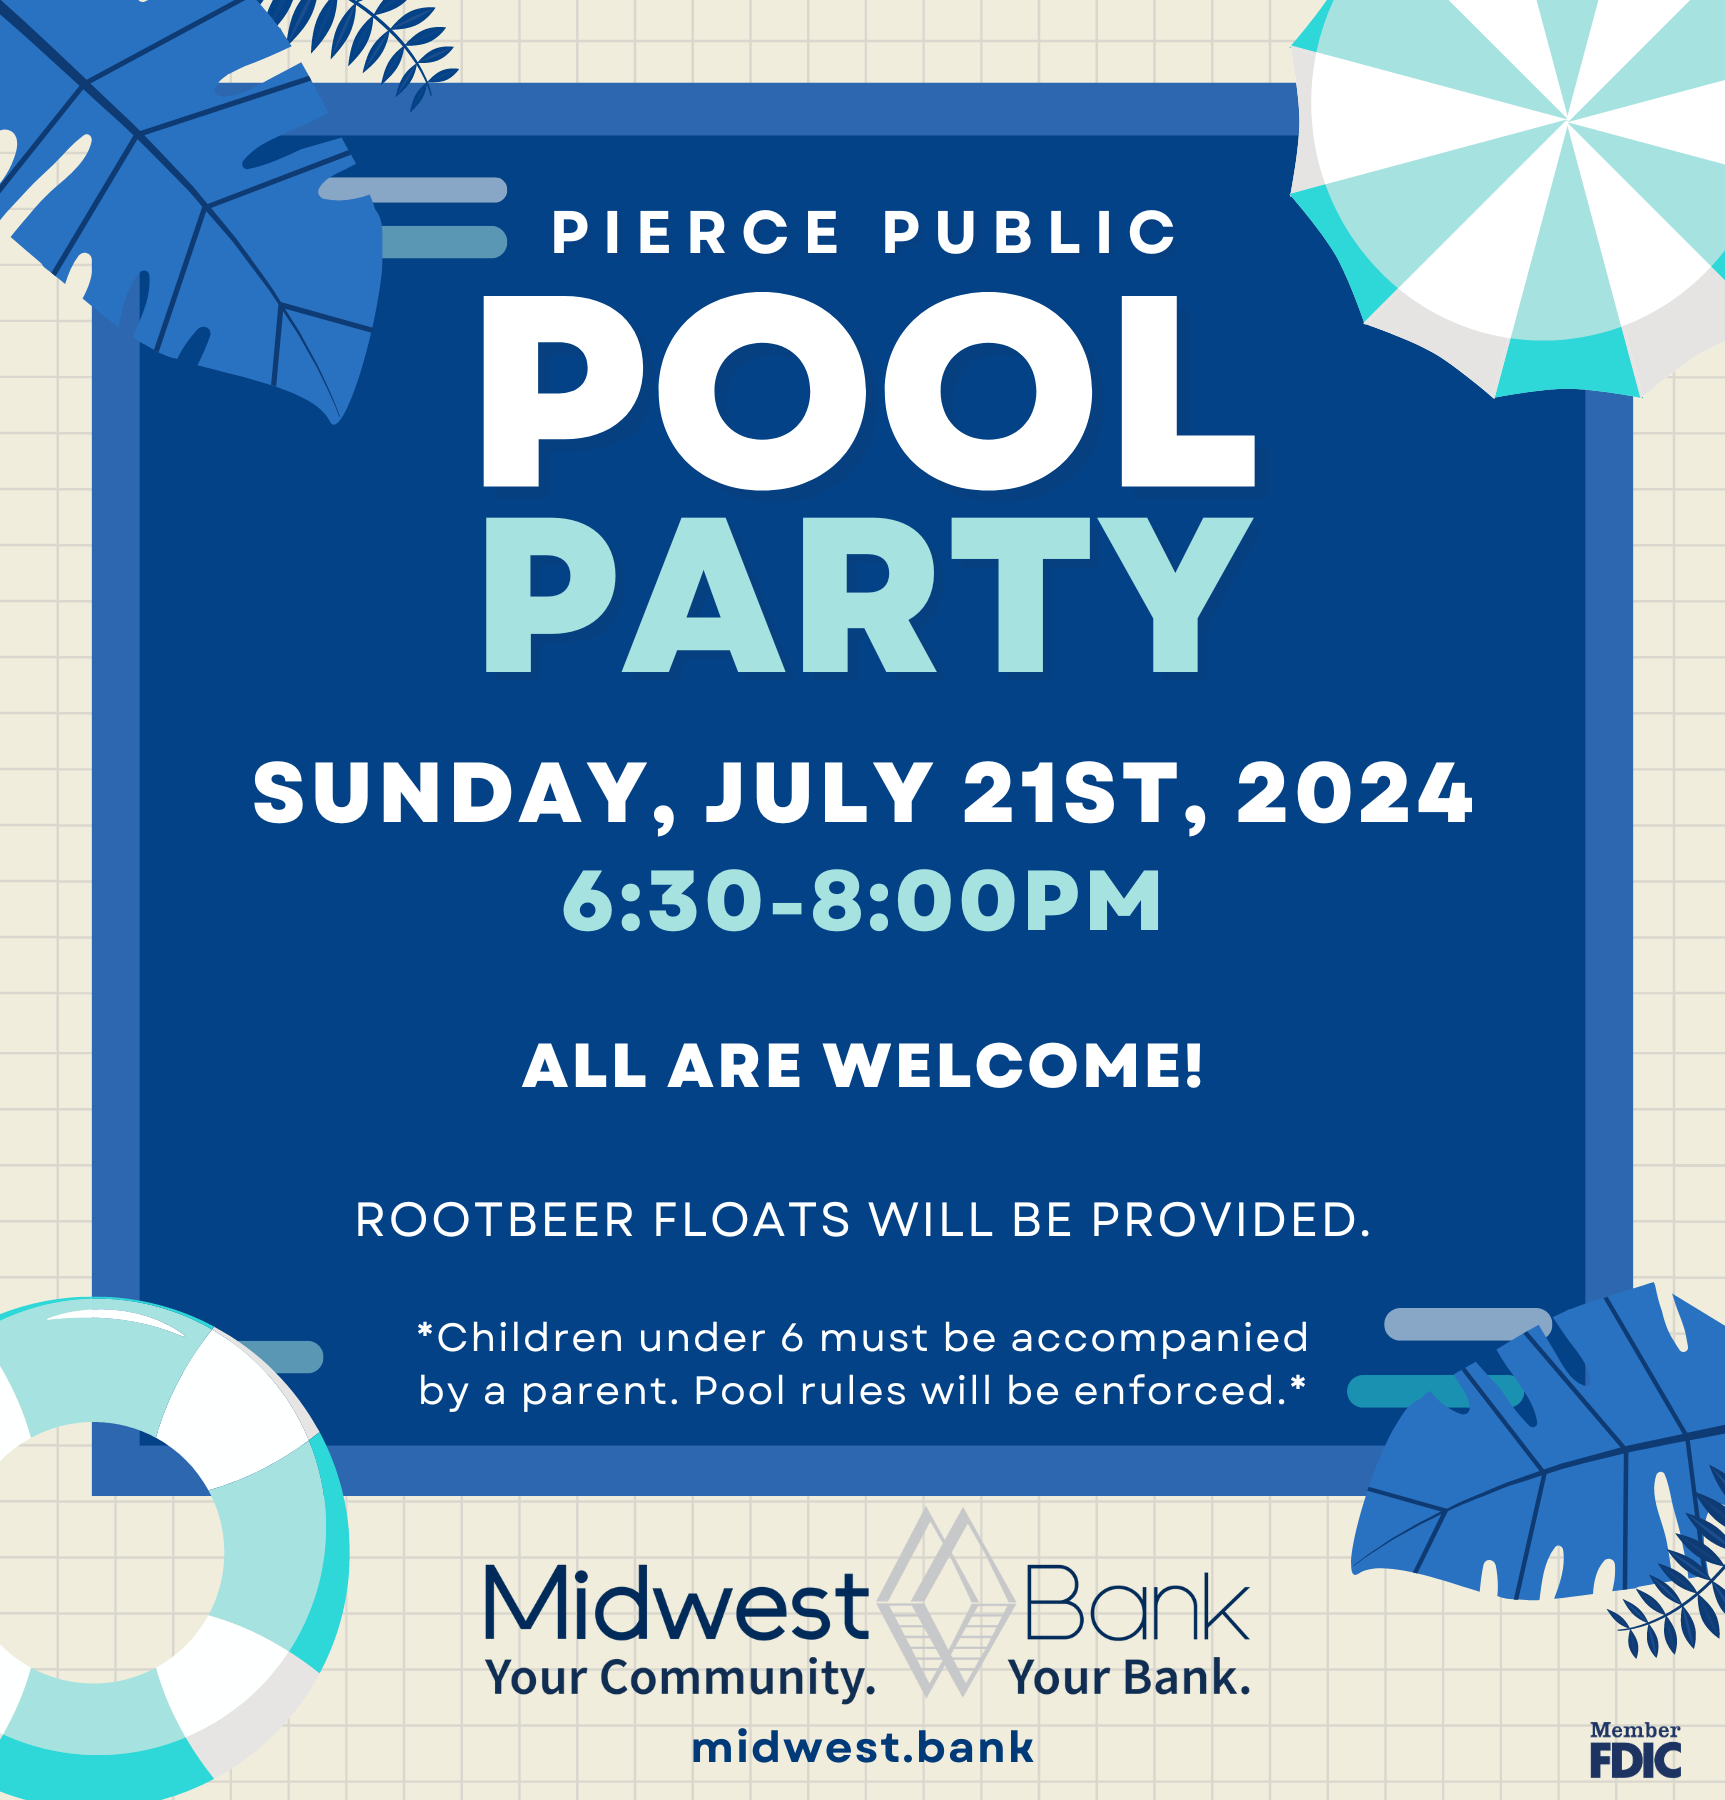 Pierce Pool Party graphic ad